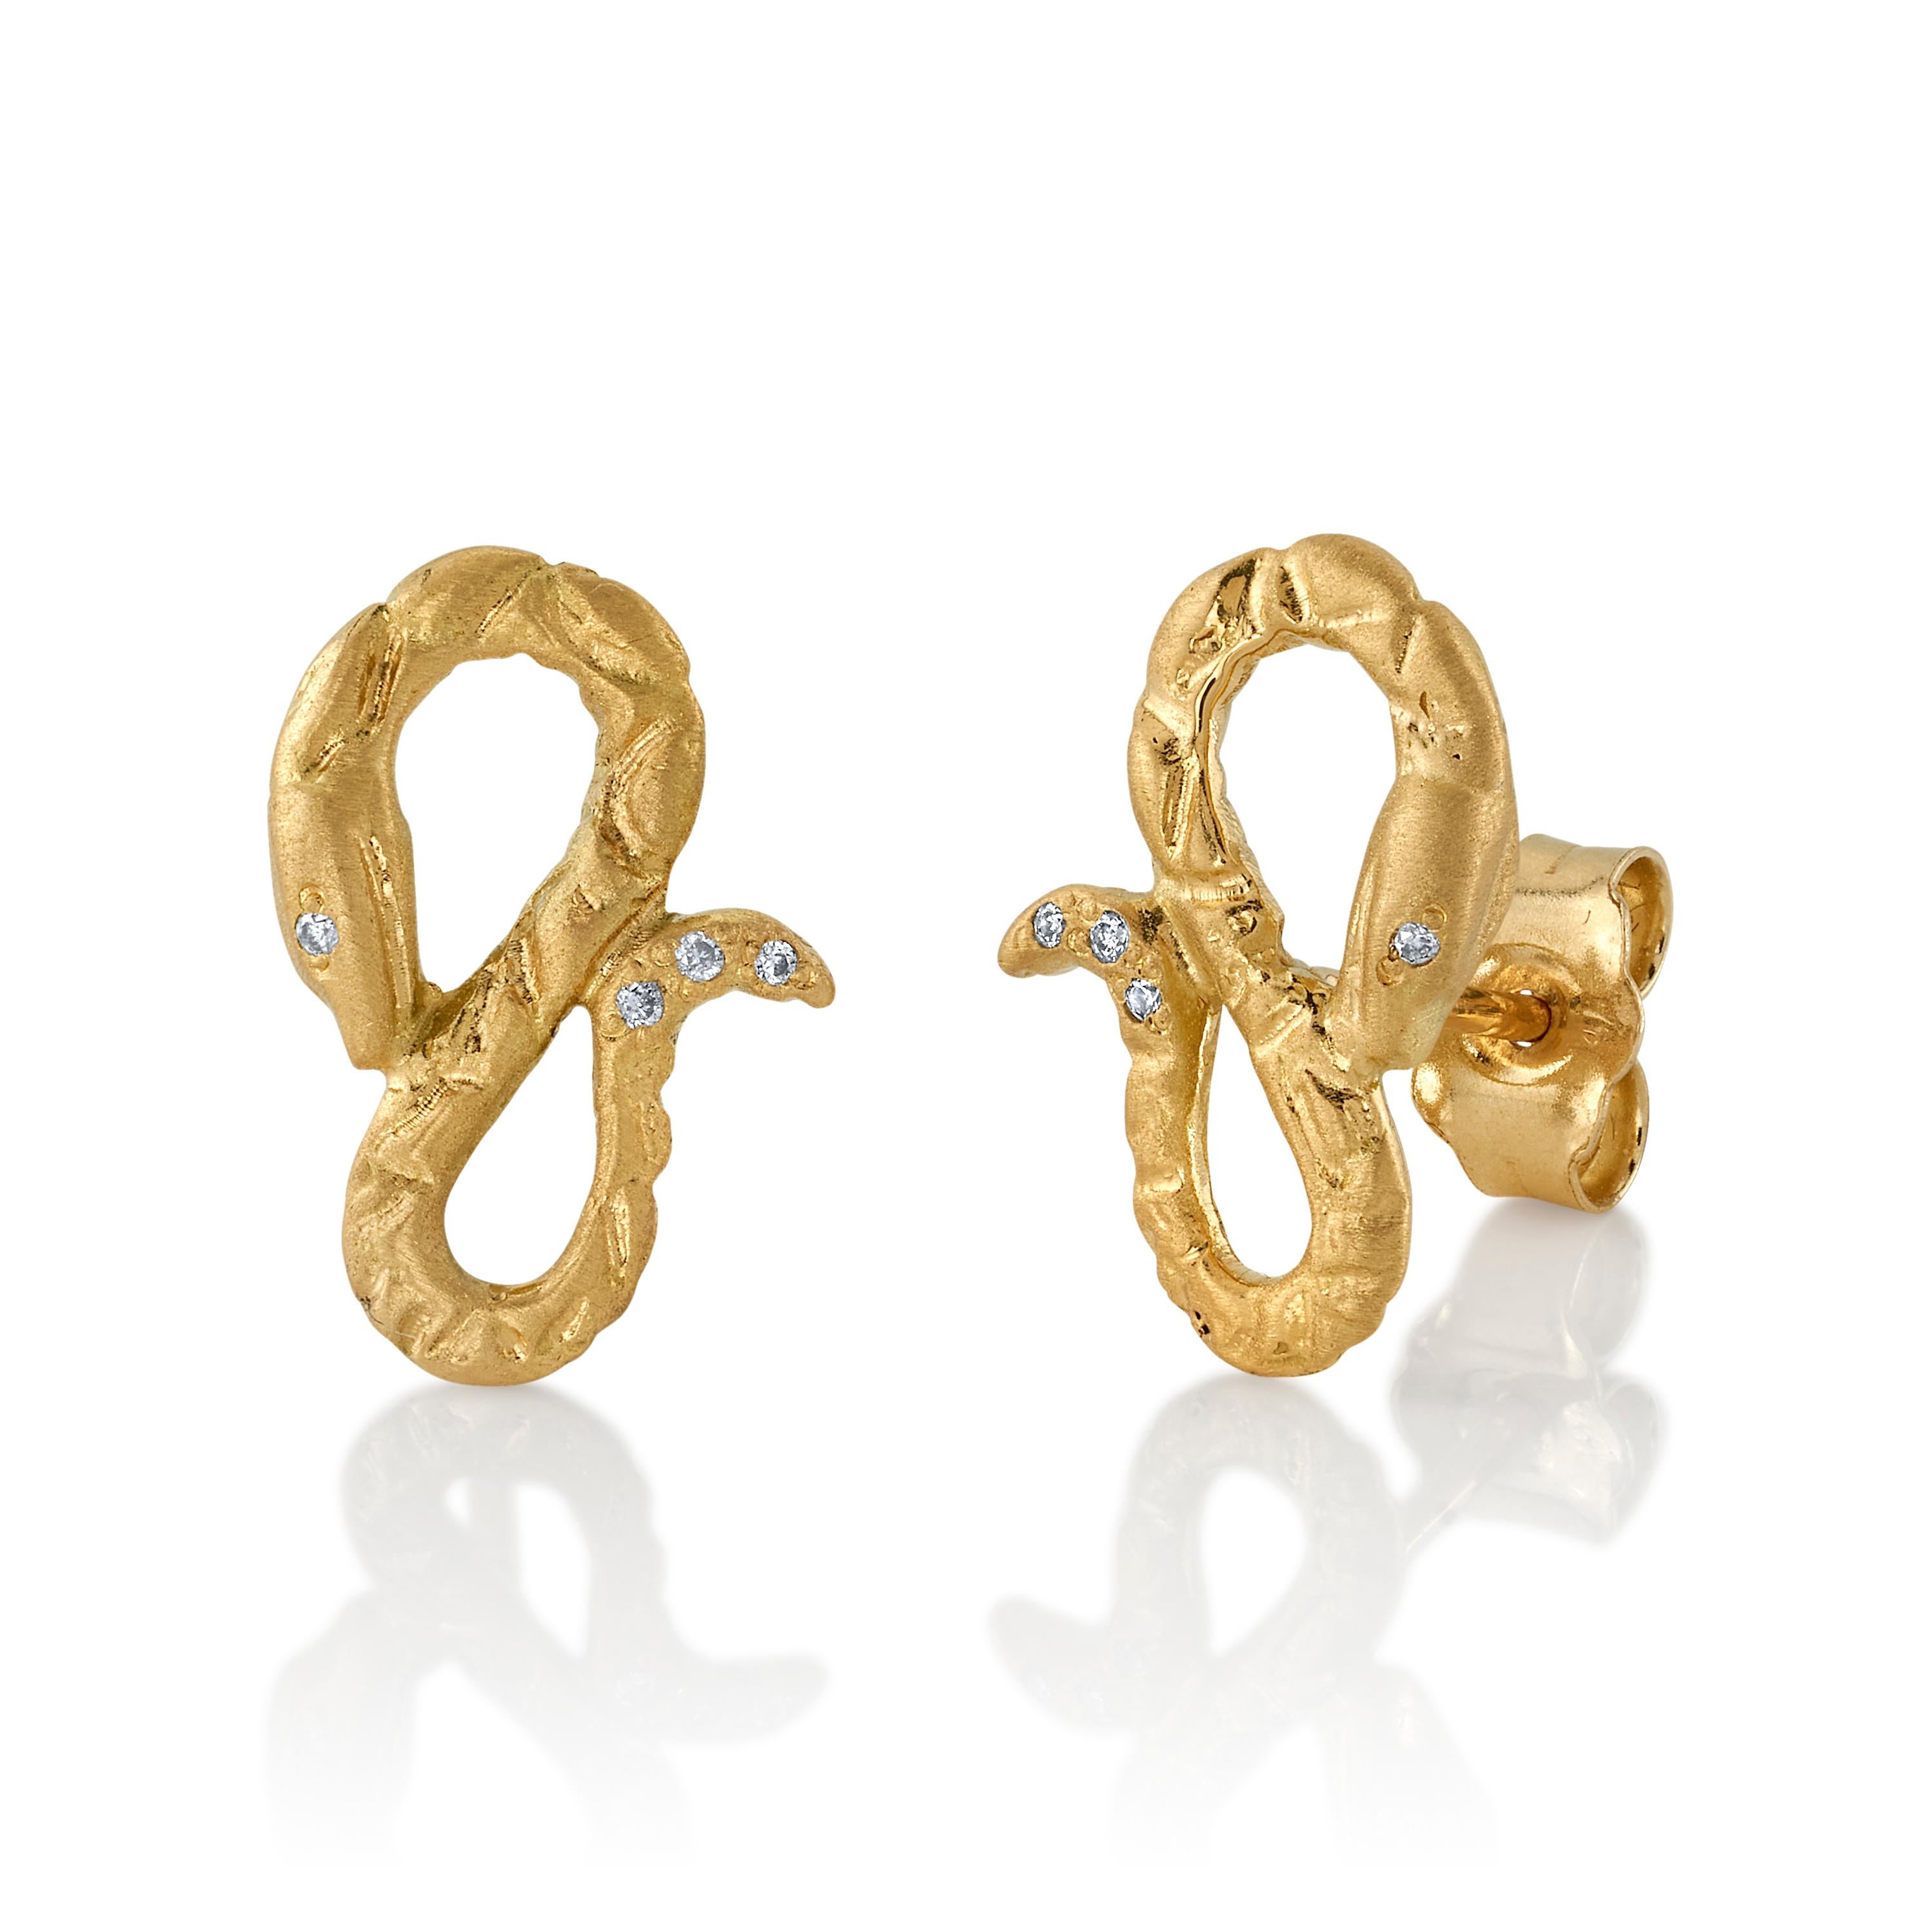 18k yellow gold, s-shaped snake stud earrings, from the House of RAVN Serpentine Collection.

Available in 18k yellow gold, rose gold, white gold or black rhodium.



The House of RAVN Serpentini Collection—an ode to the mesmerizing and enigmatic